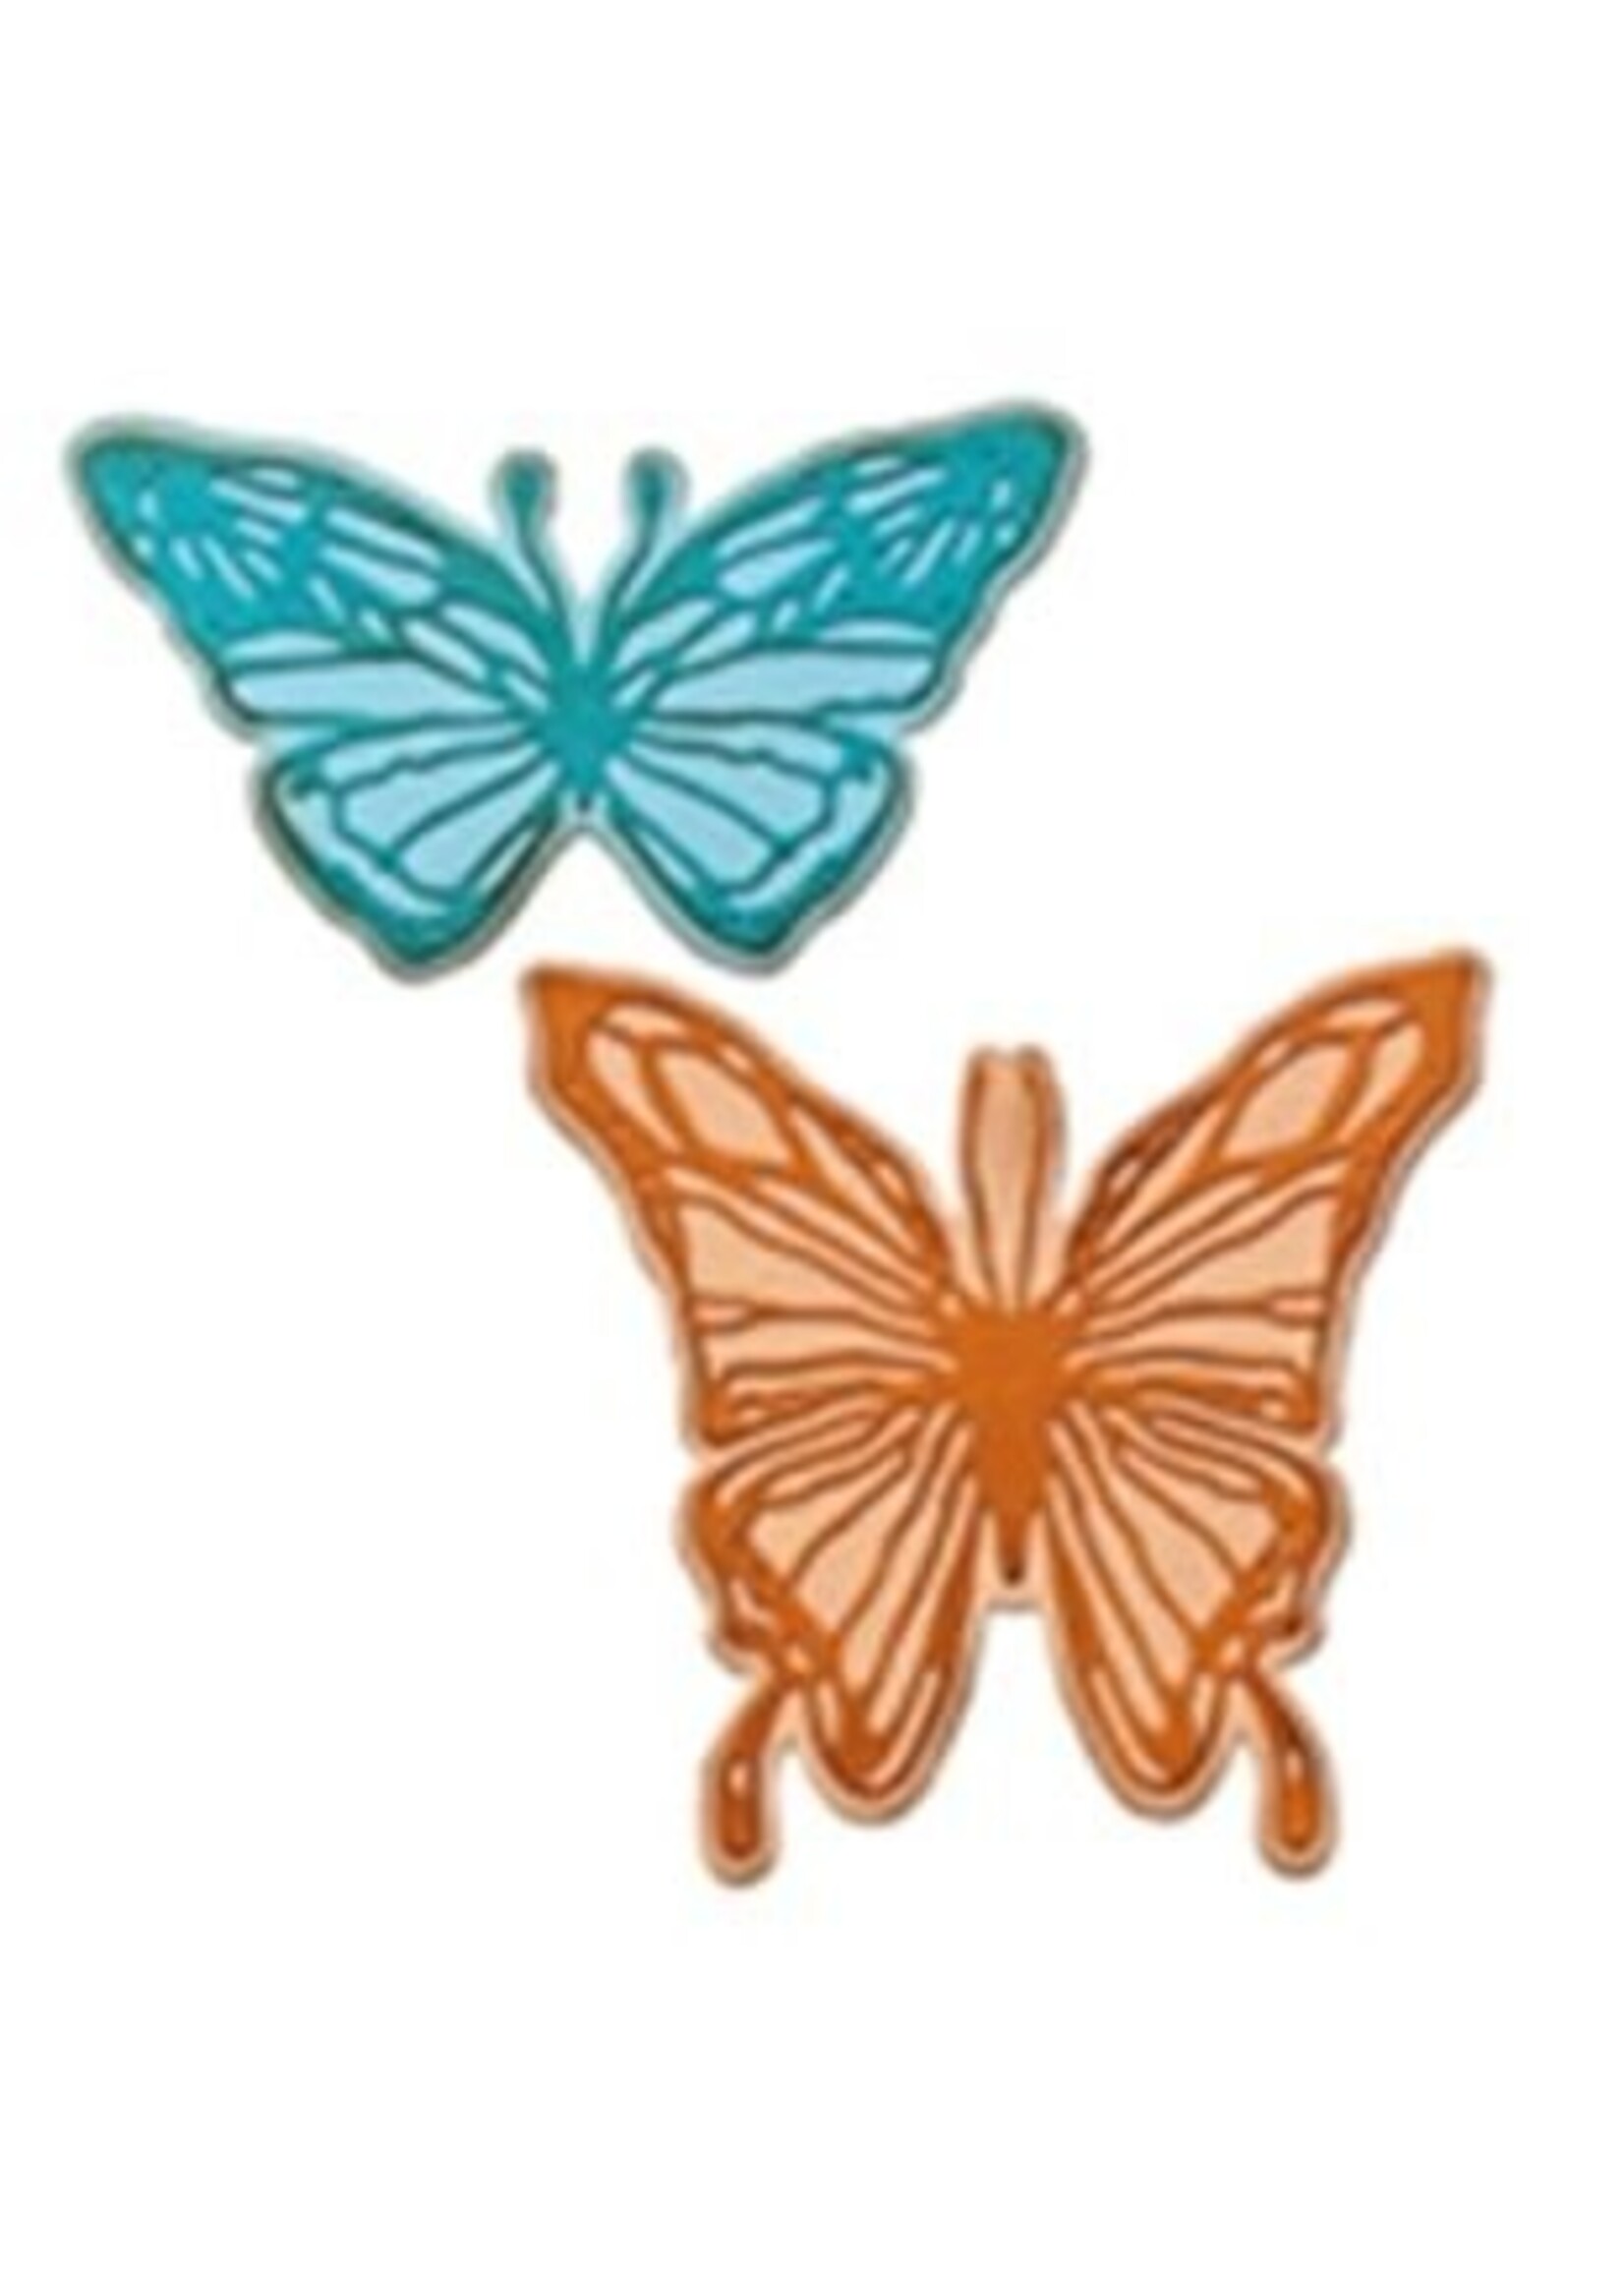 Sizzix Tim Holtz Thinlits, 666564 Scribble Butterfly